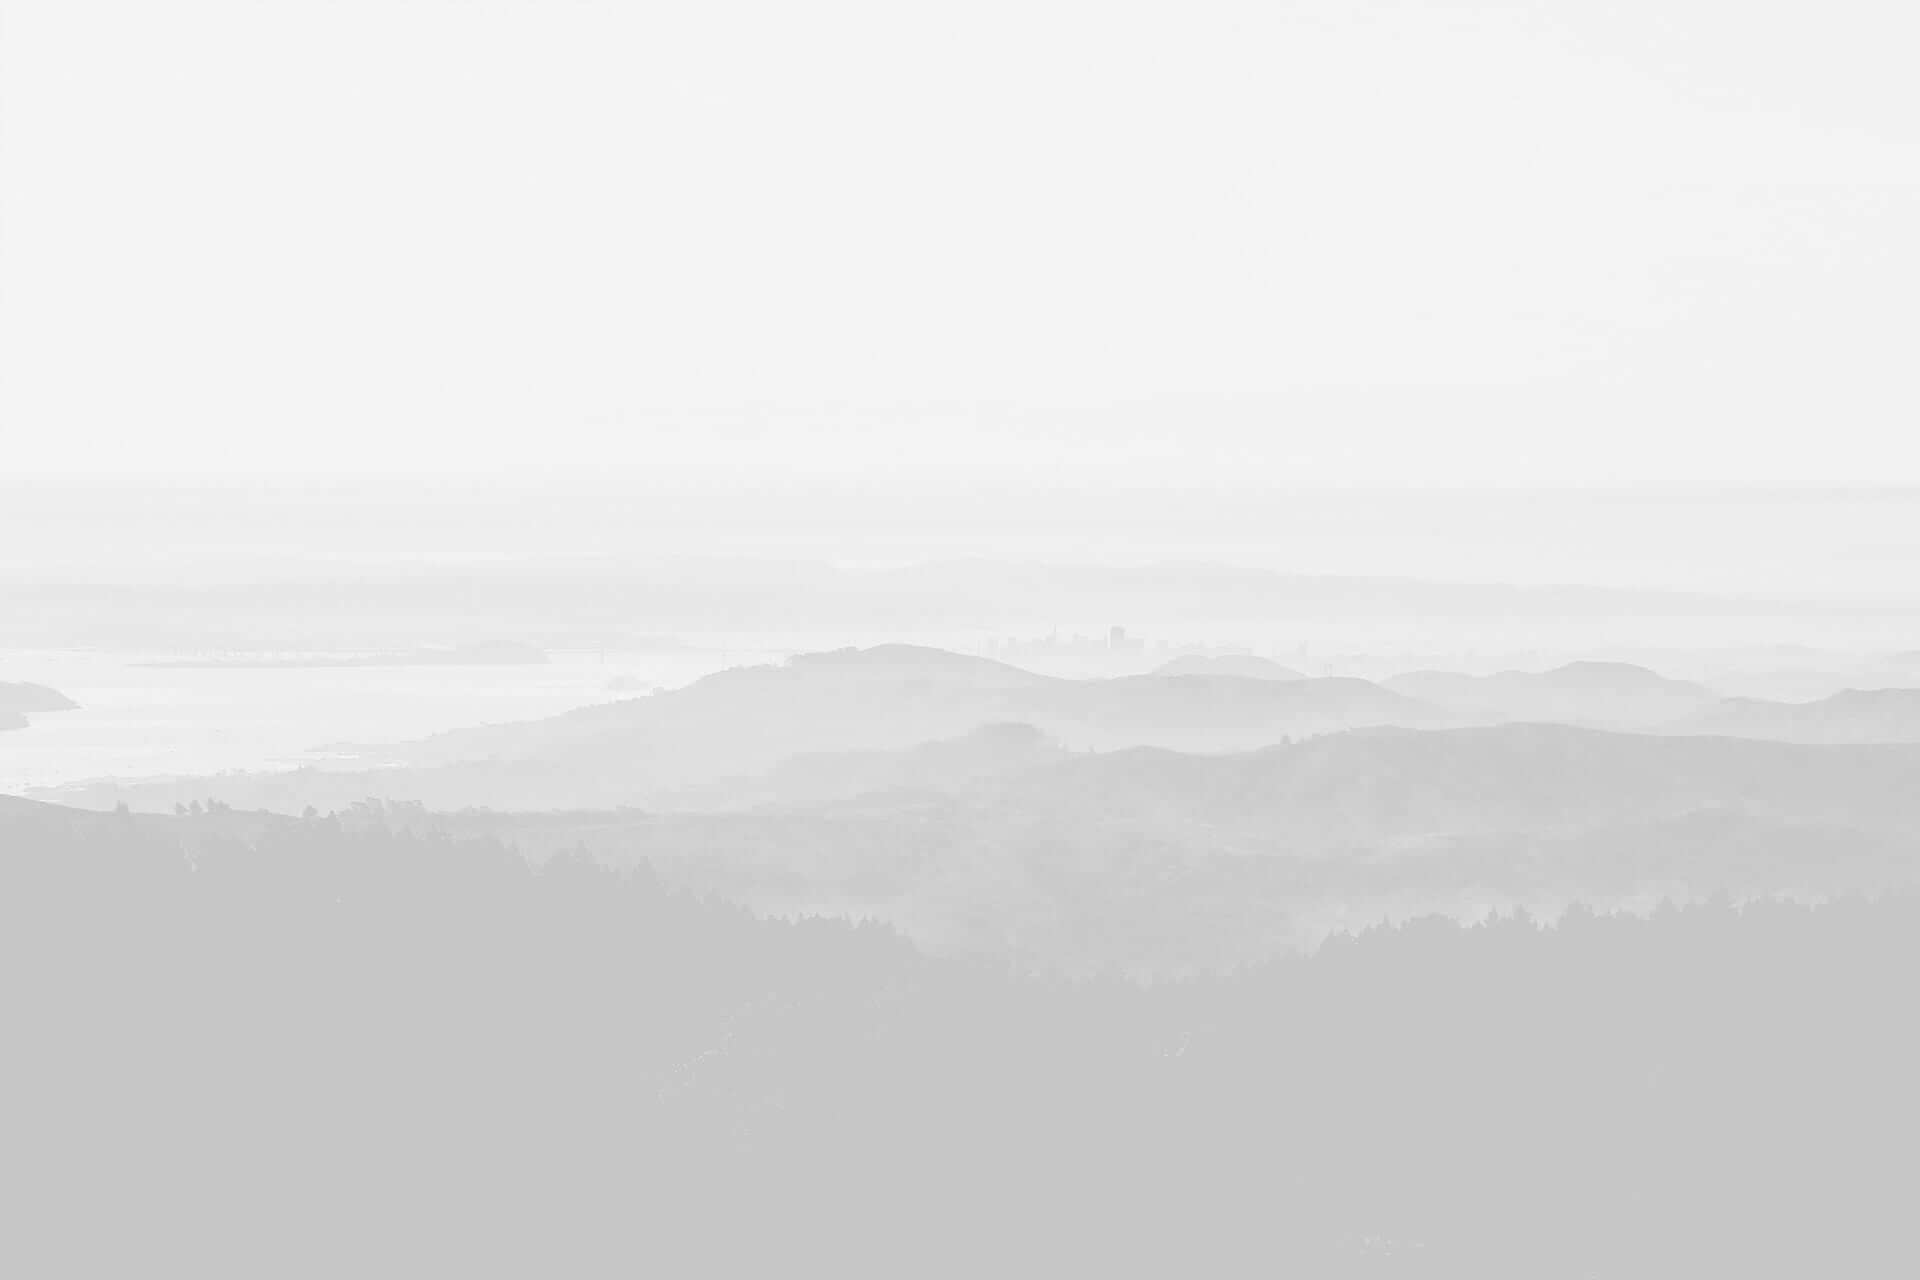 A monochrome landscape of layered mountain ridges under a hazy sky, with a hint of a water body in the distance.